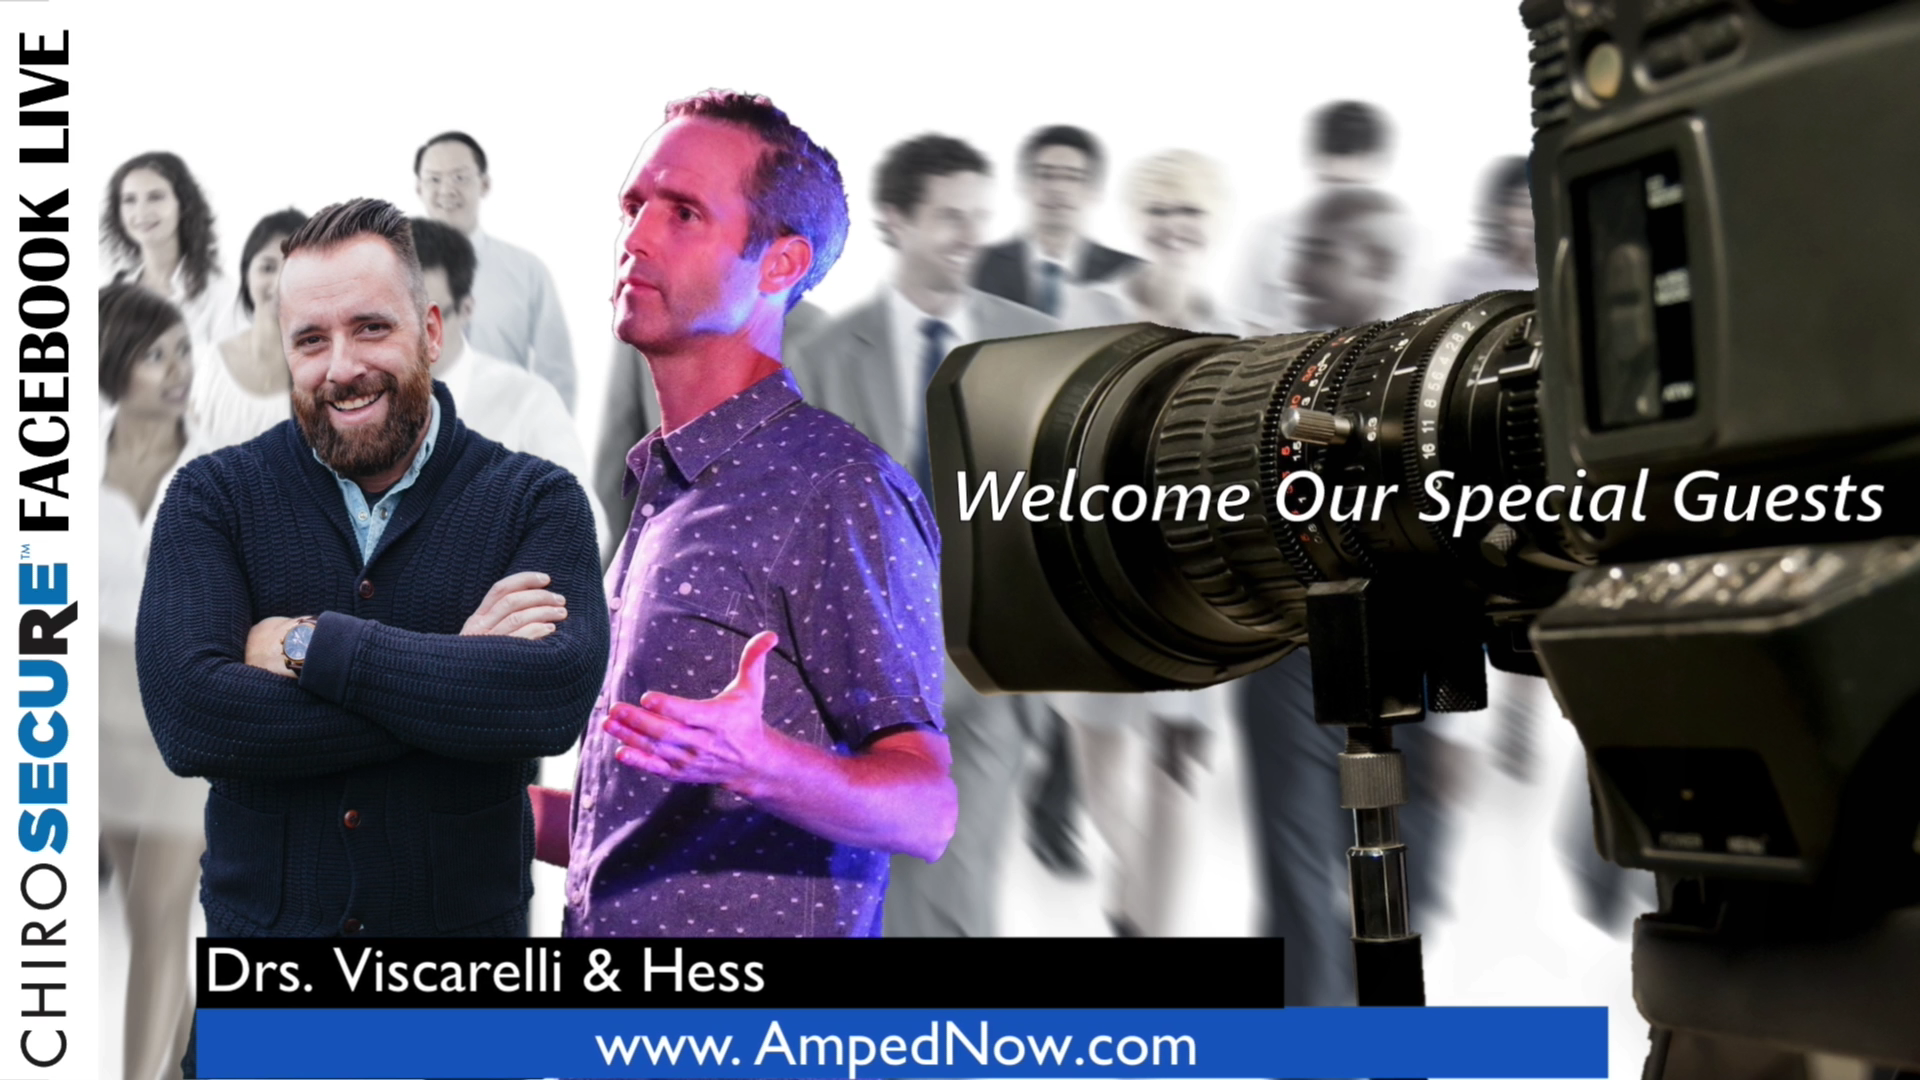 Drs. Viscarelli & Hess for AMPED NOW